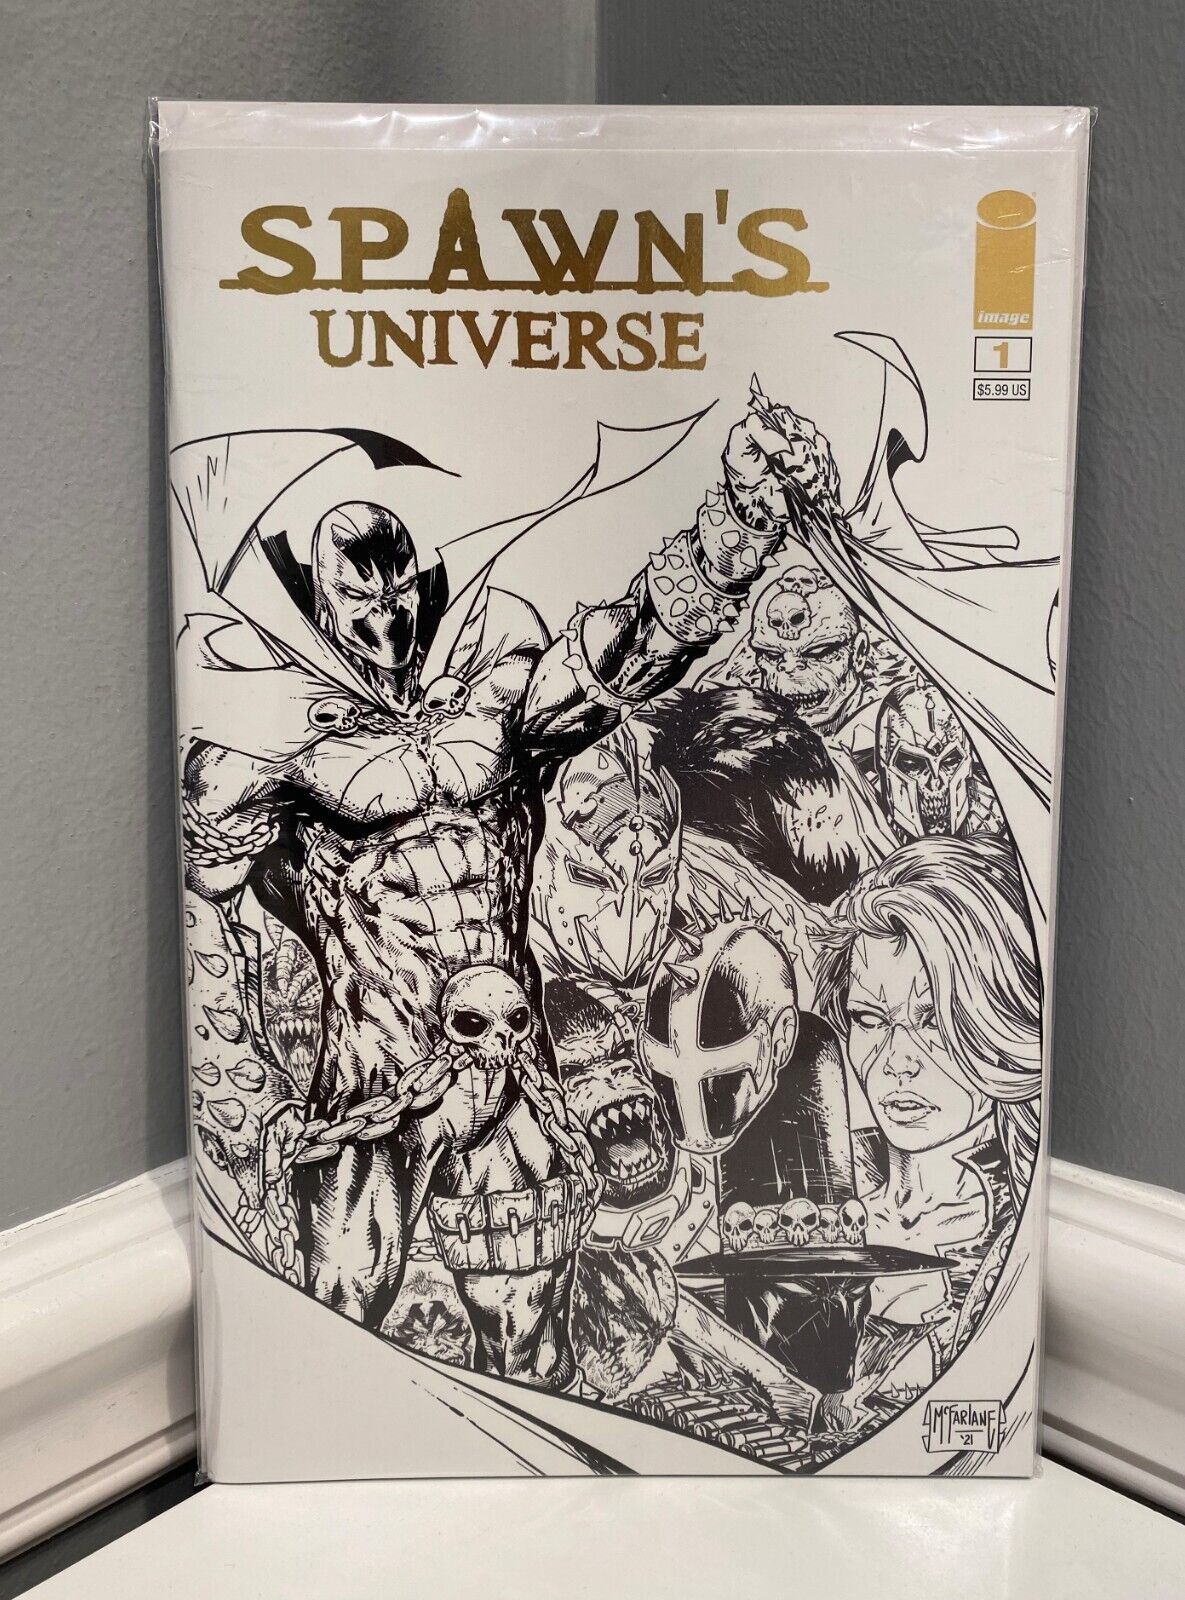 Spawn's Universe #1 Gold Foil Variant McFarlane Store Exclusive B&W Cover Image